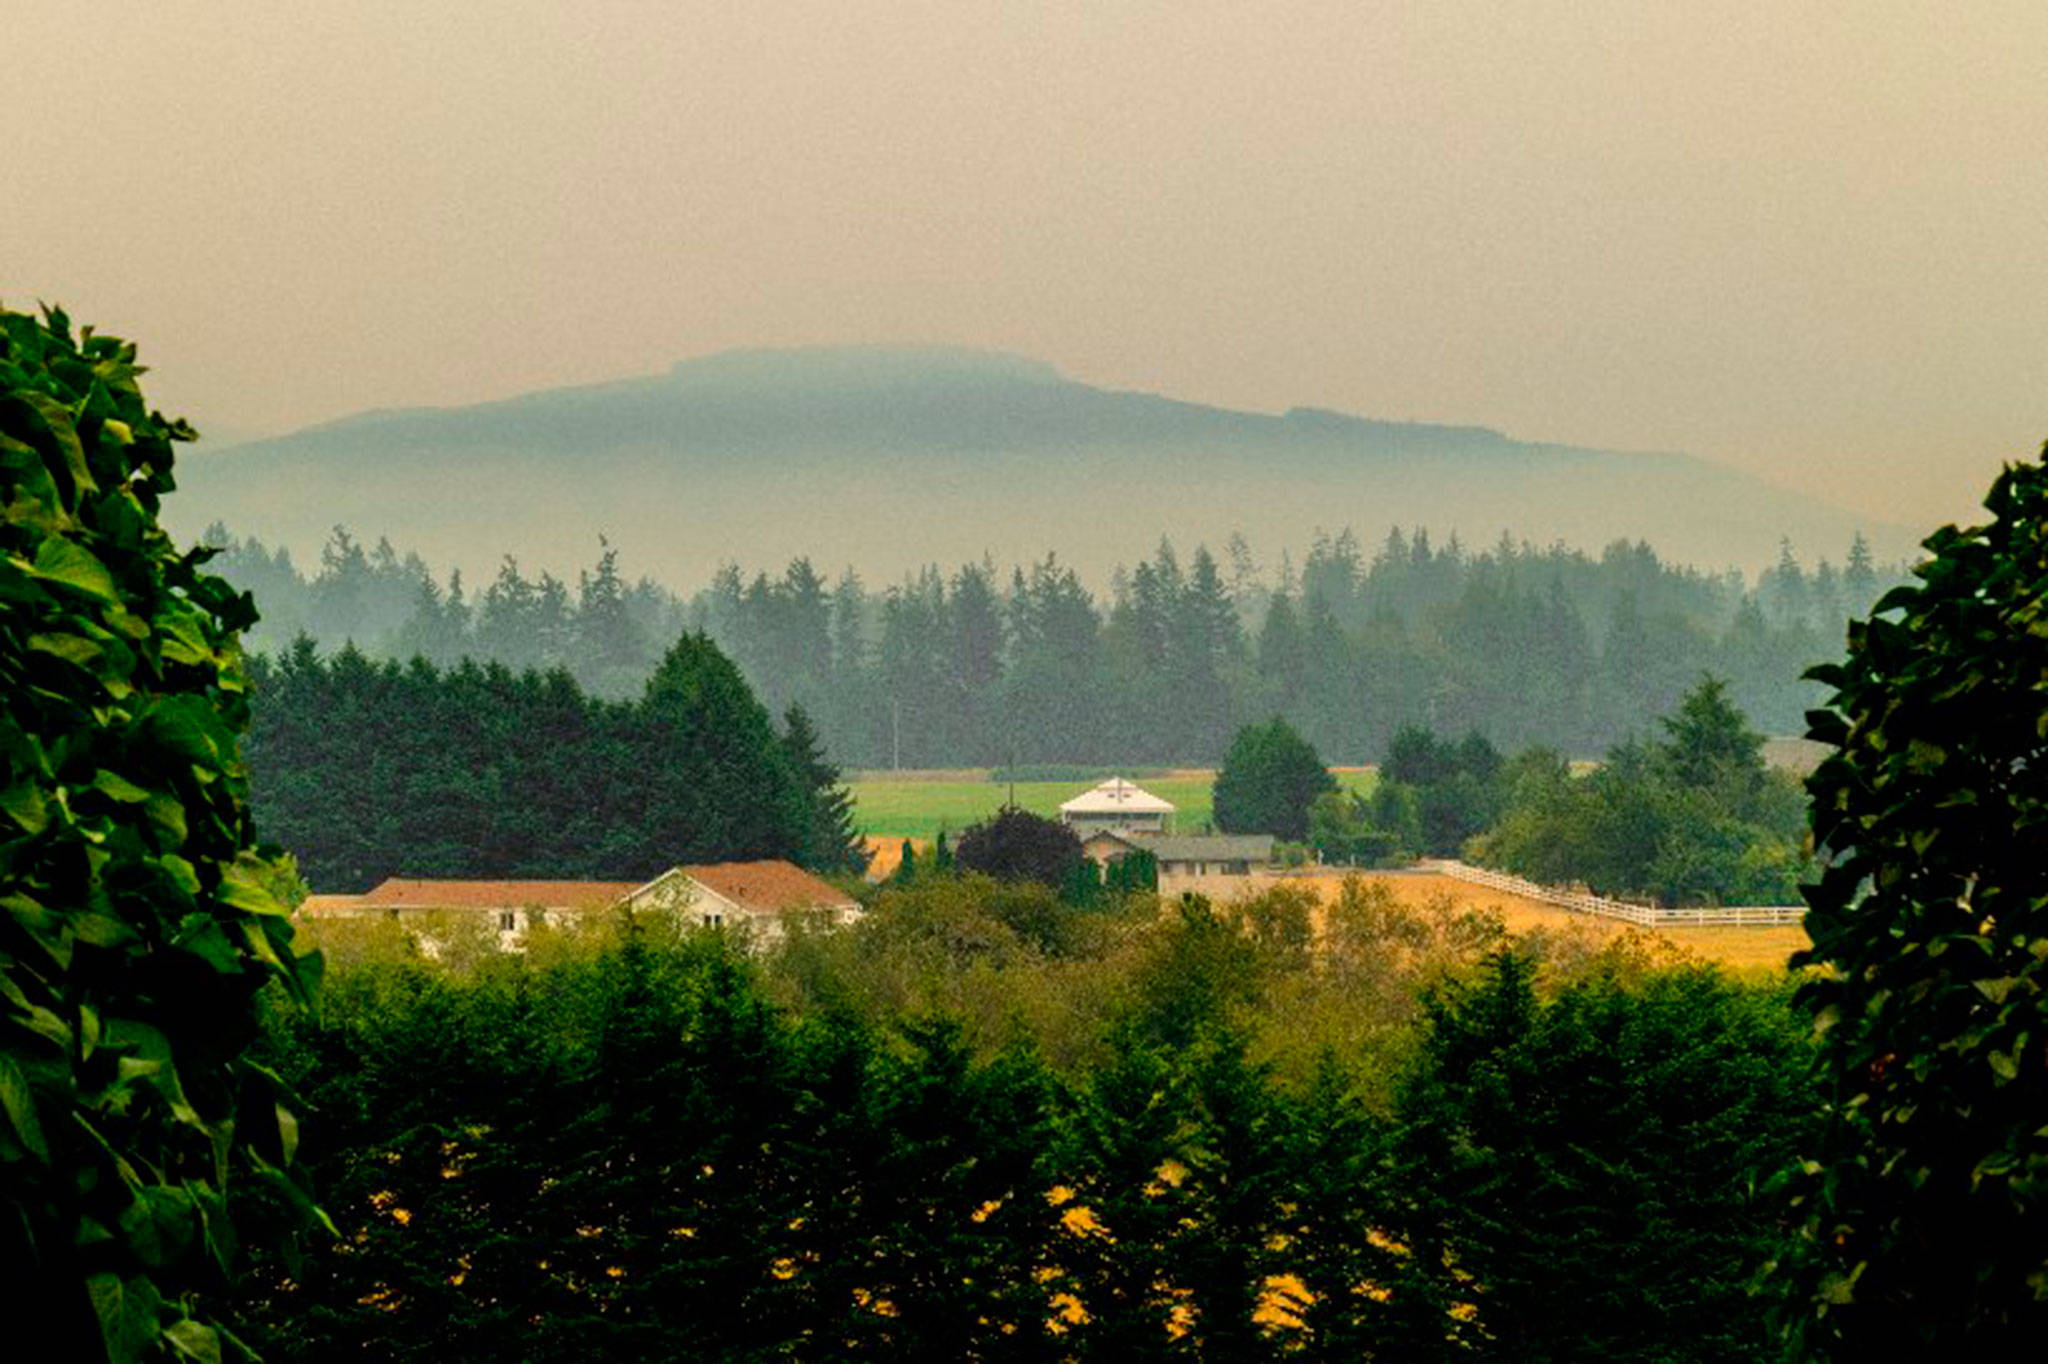 Contributor Bob Lampert captures a shot of the haze on Tuesday morning over the Sequim-Dungeness Valley as wildfires from Central Washington continue to burn. The National Weather Service reported an Air Quality Alert through 5 p.m. Wednesday.